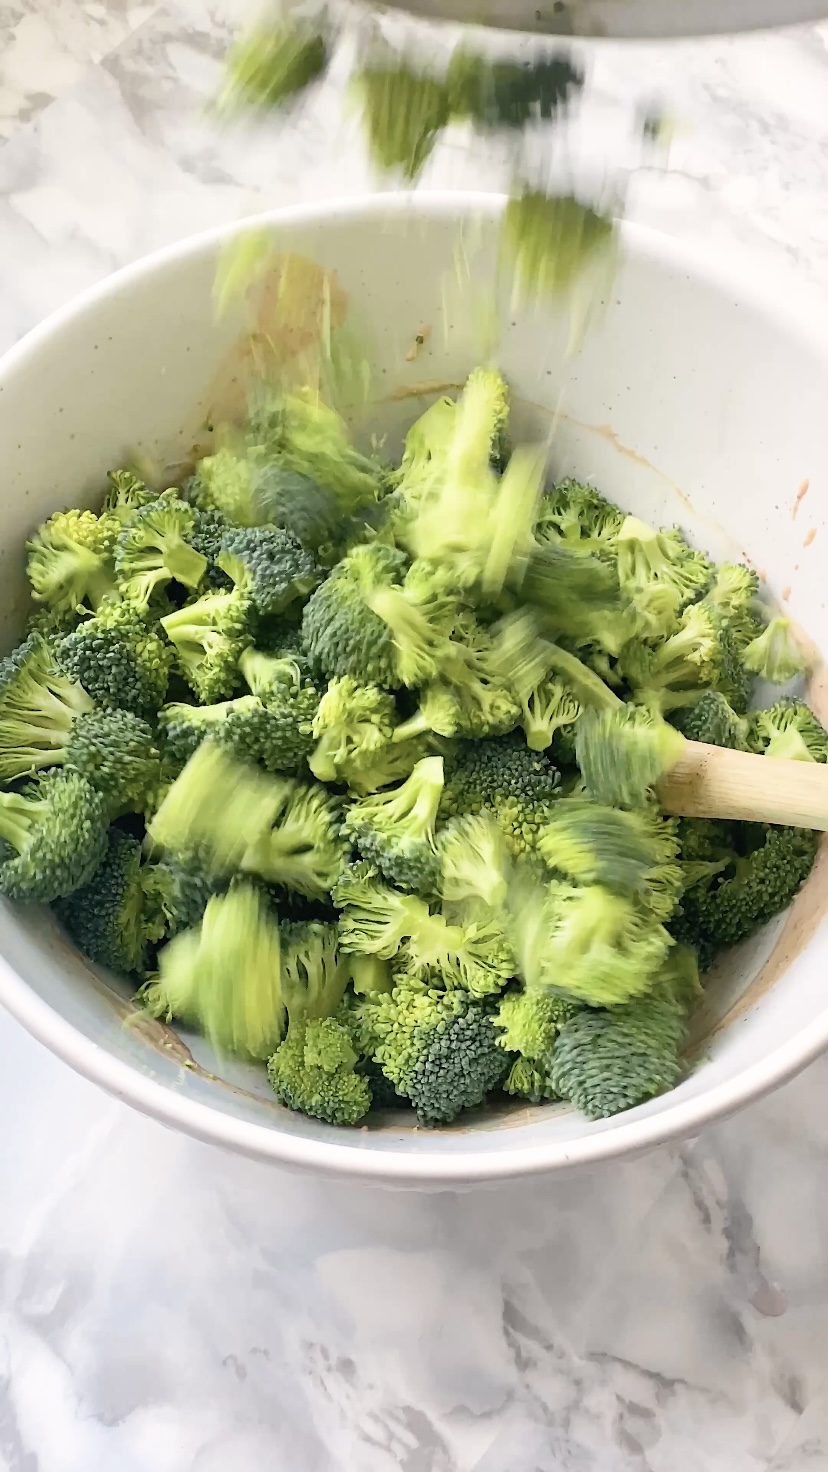 Broccoli is poured into a mixing bowl.